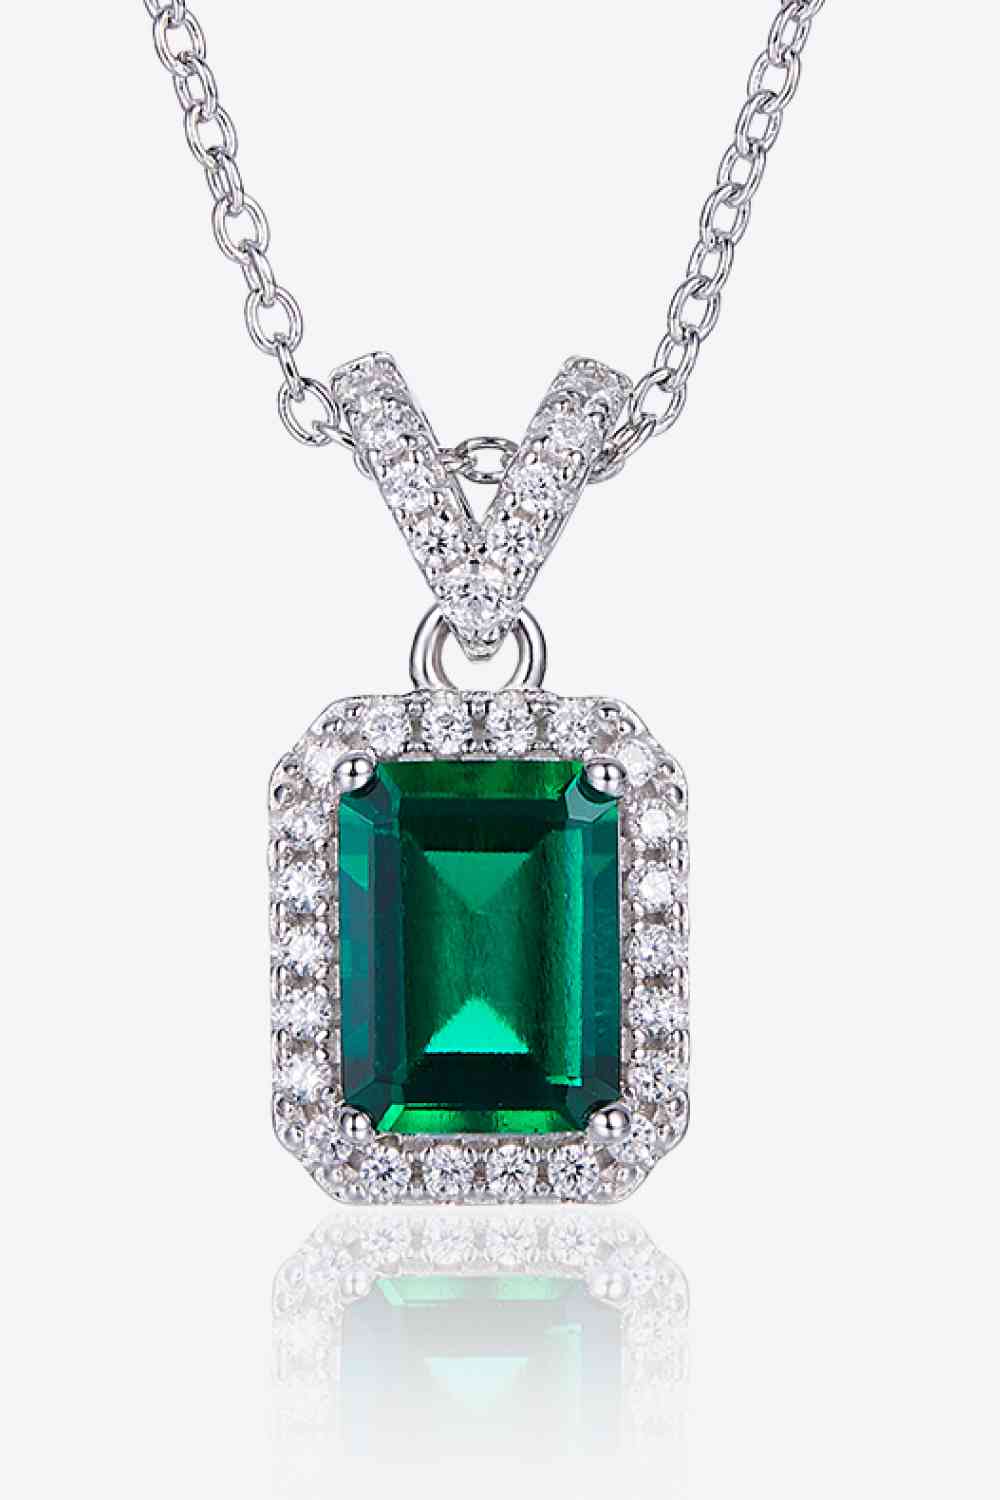 Adored 1.25 Carat Lab-Grown Emerald Pendant Necklace  Hot Trends